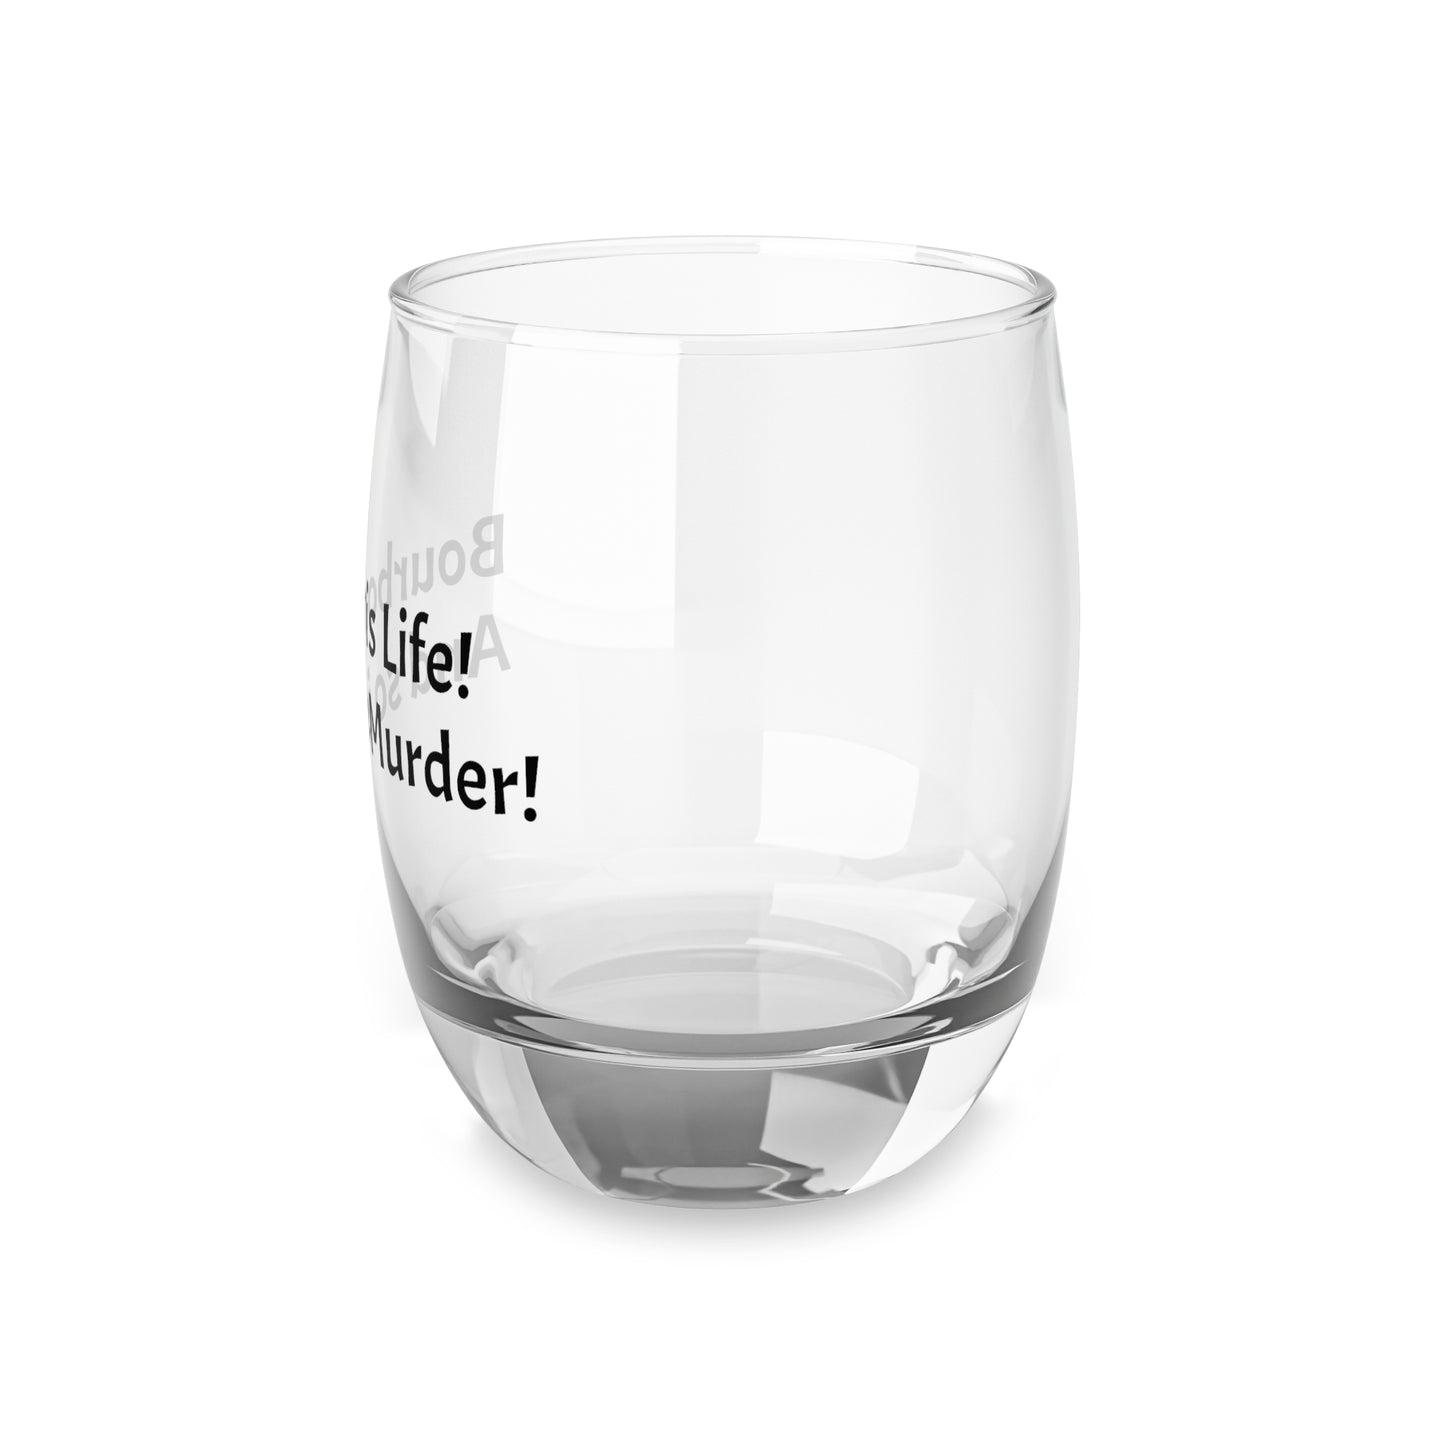 Bourbon is Life! Whiskey Glass